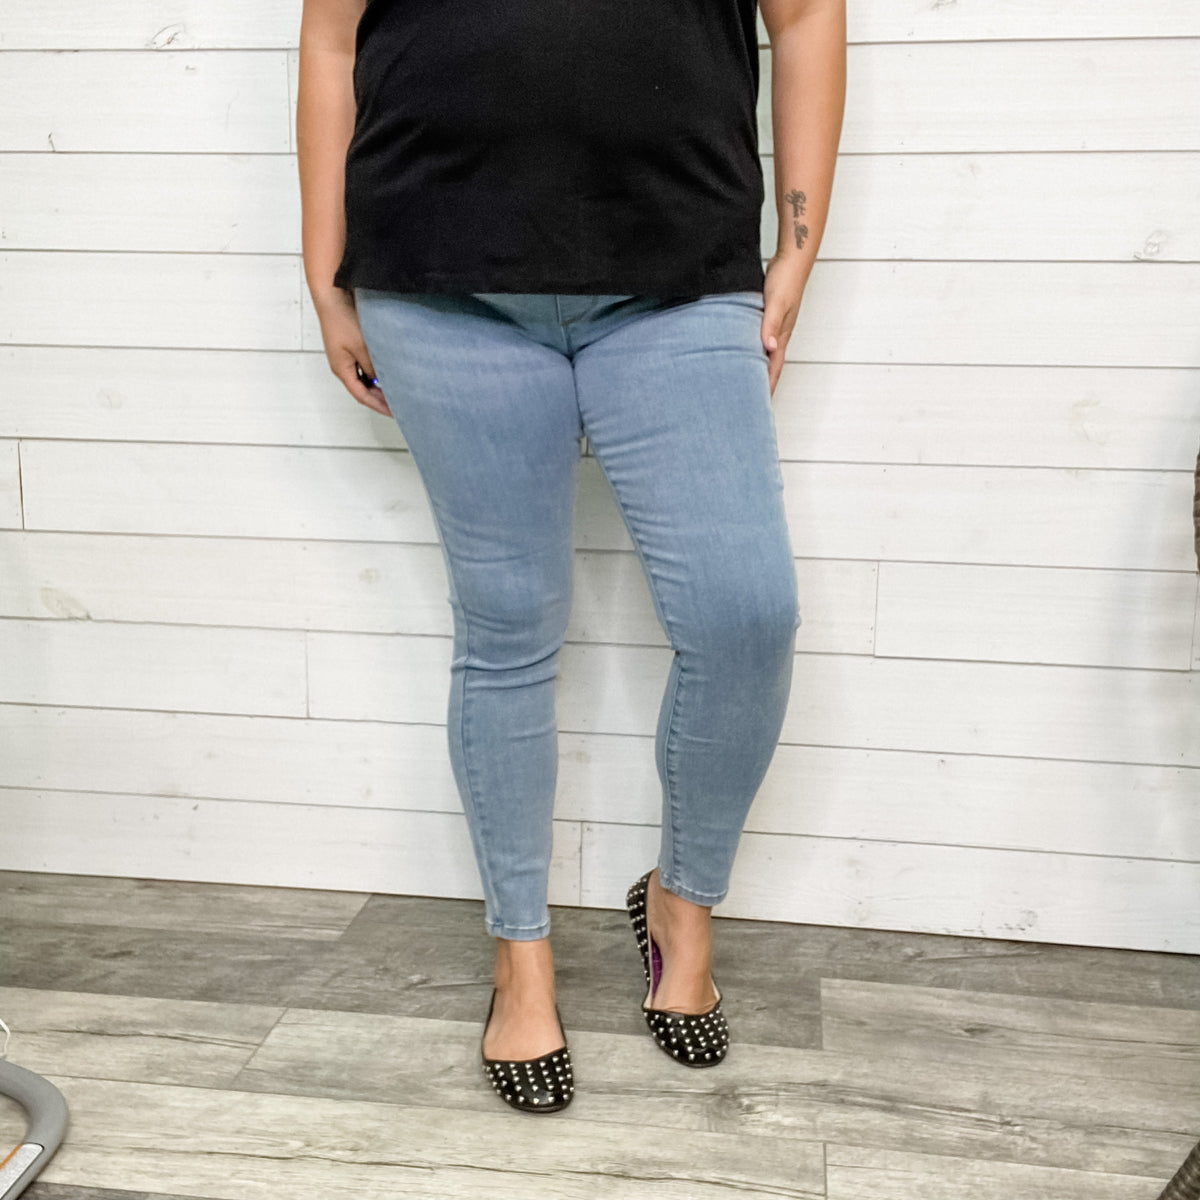 Fashion Look Featuring Leggings Depot Jeggings and H&M Women's